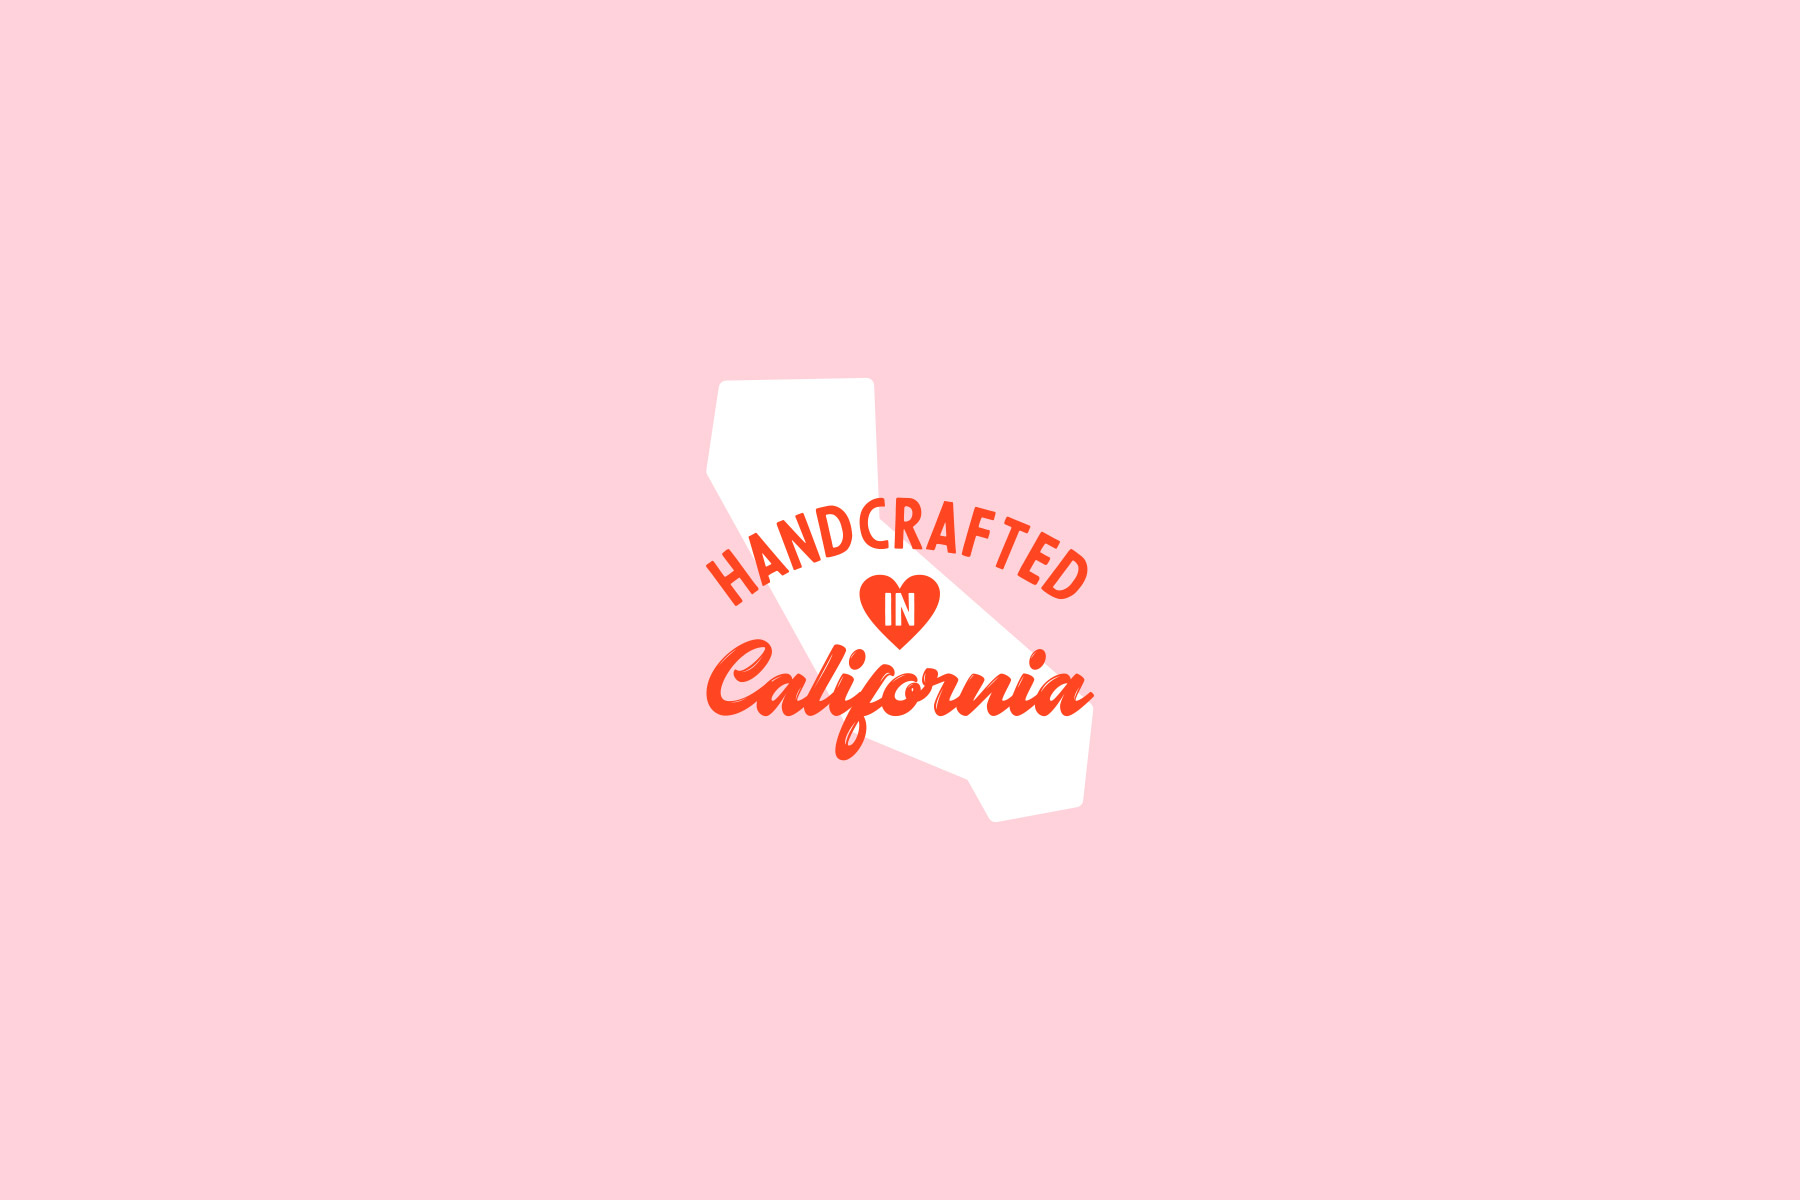 Handcrafted in California badge